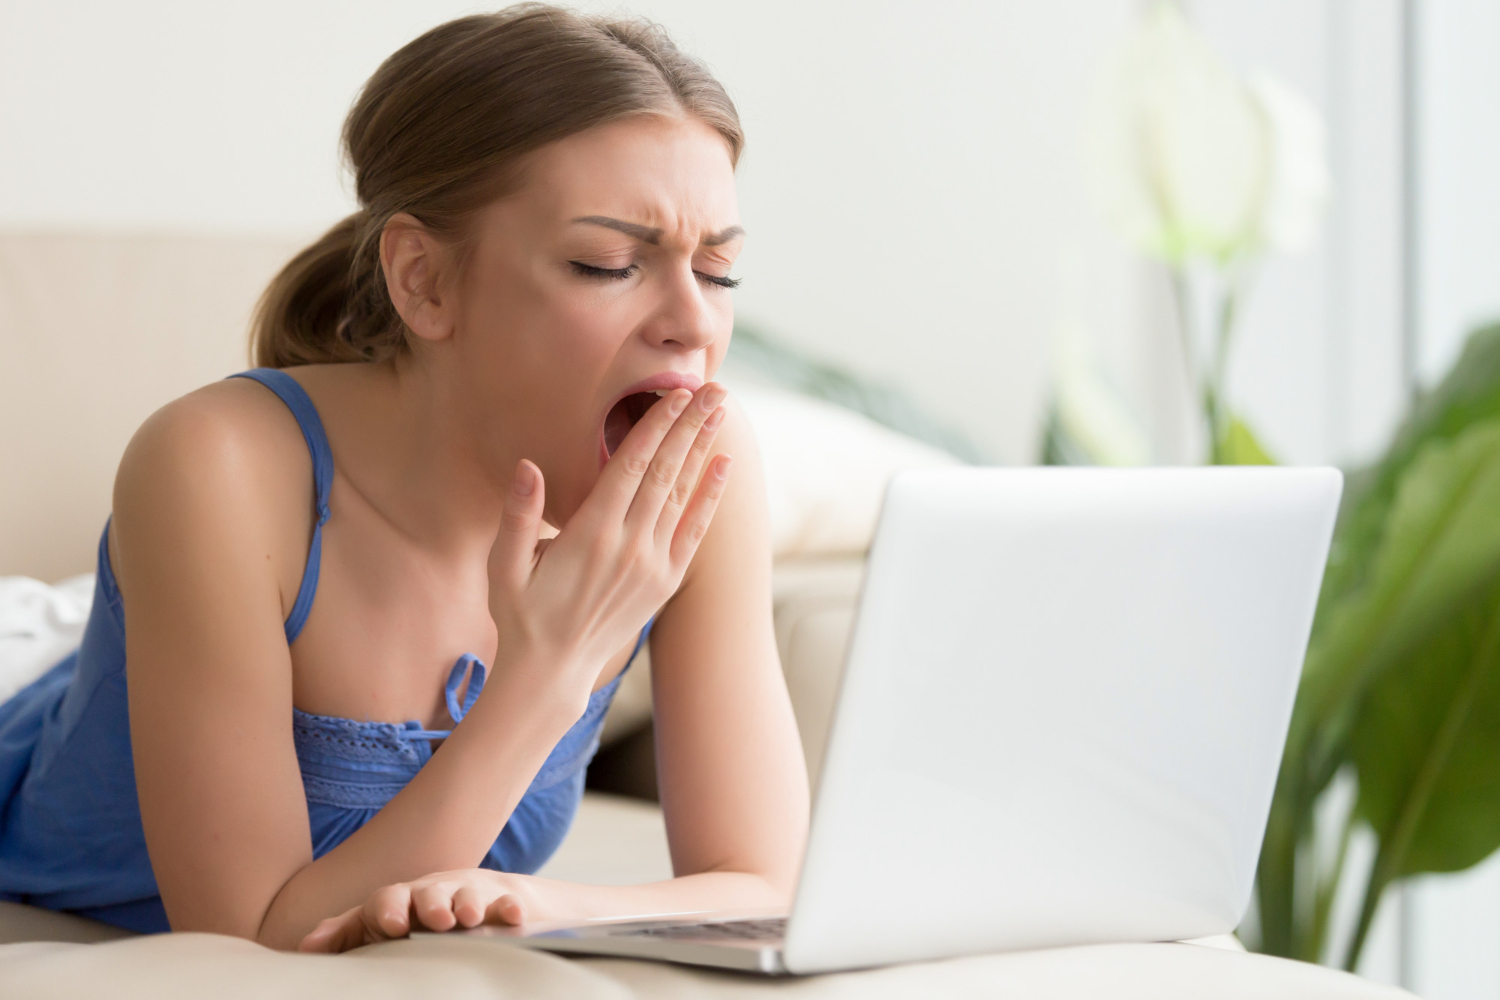 Tired woman is yawning after too long of work on a laptop